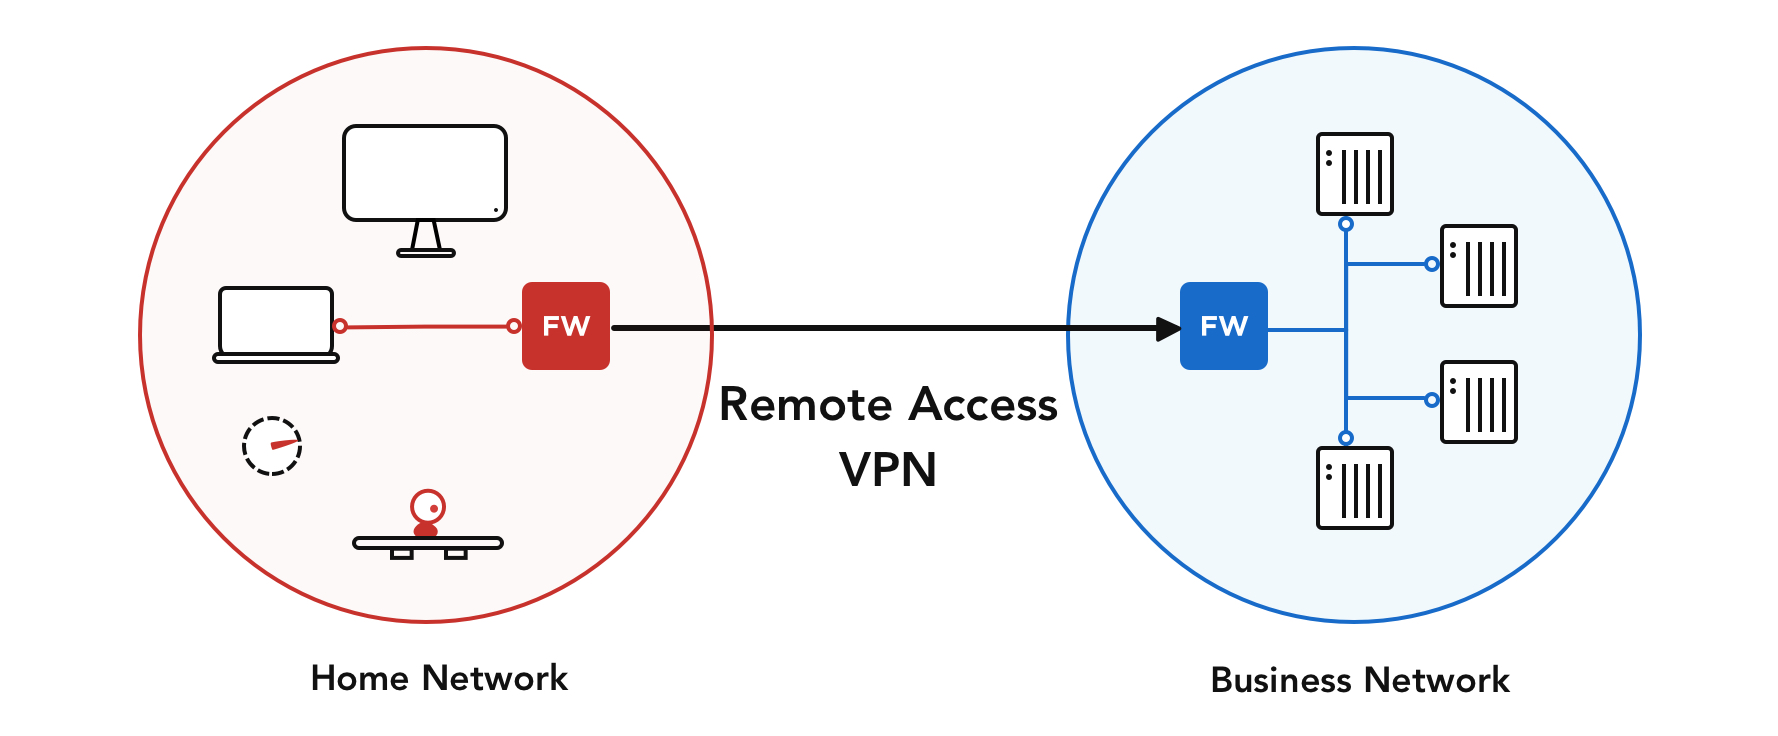  Access your home network securely with Firewalla VPN